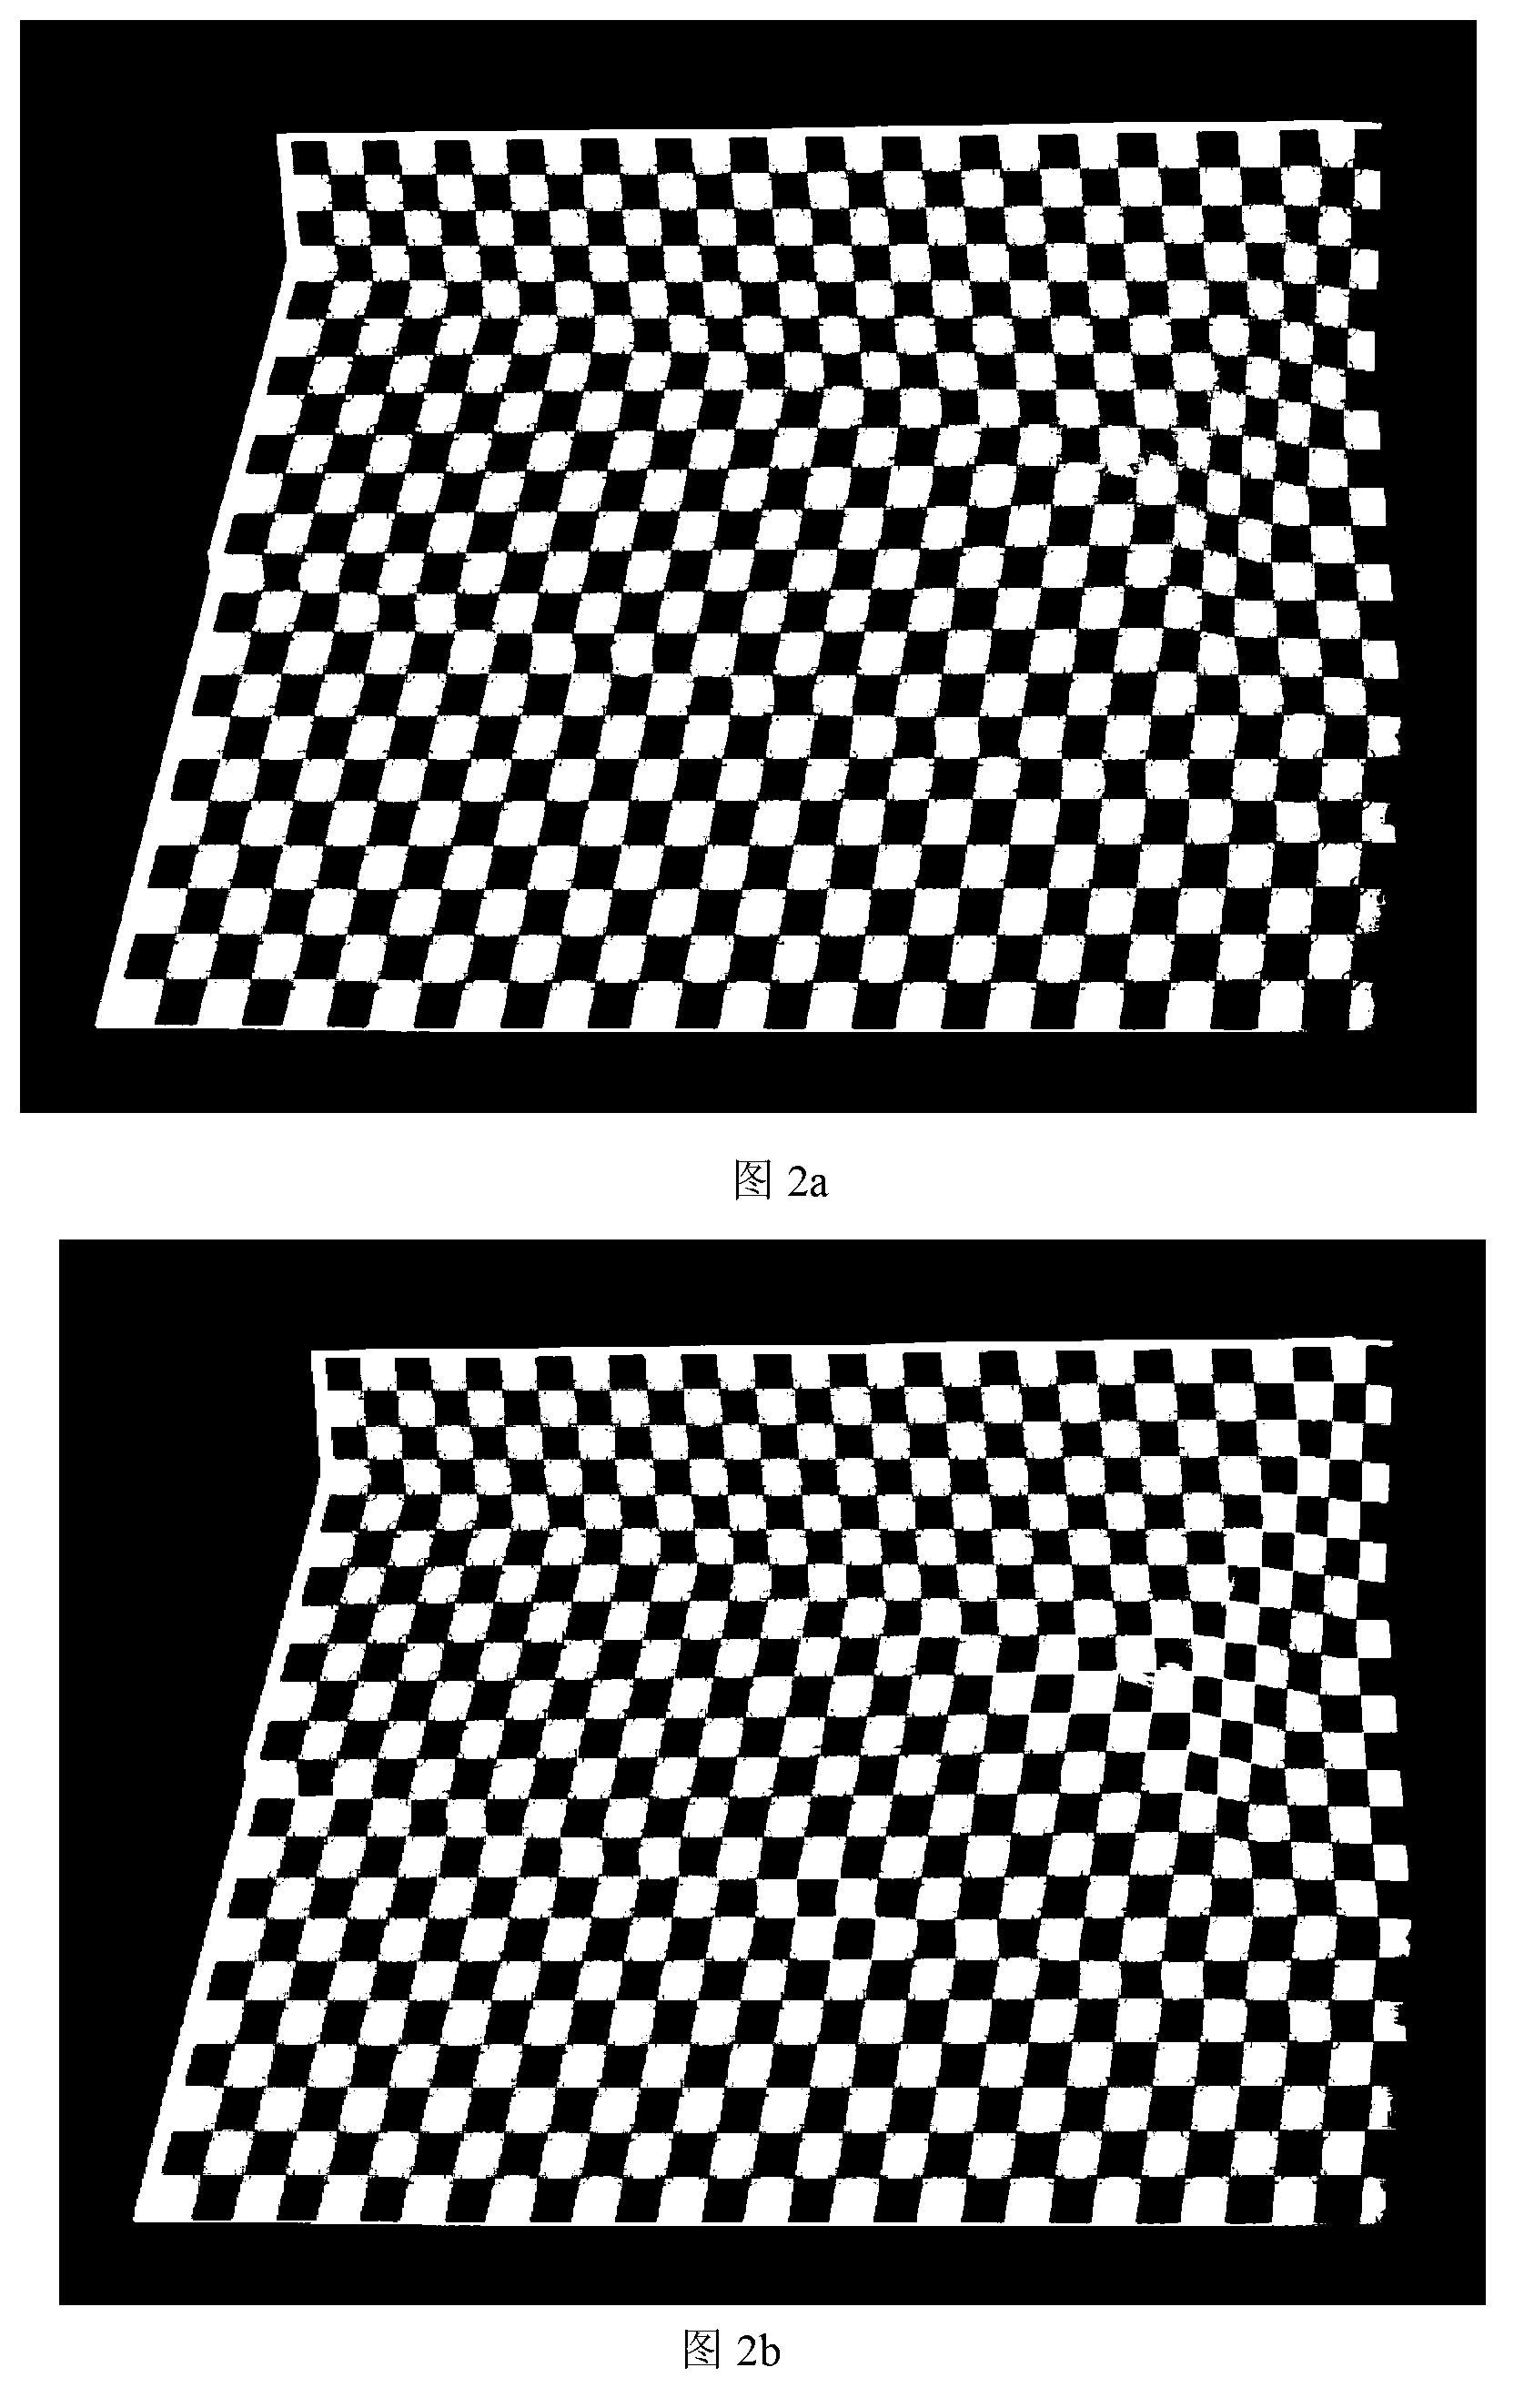 Method for automatic correction and tiled display of plug-and-play large screen projections